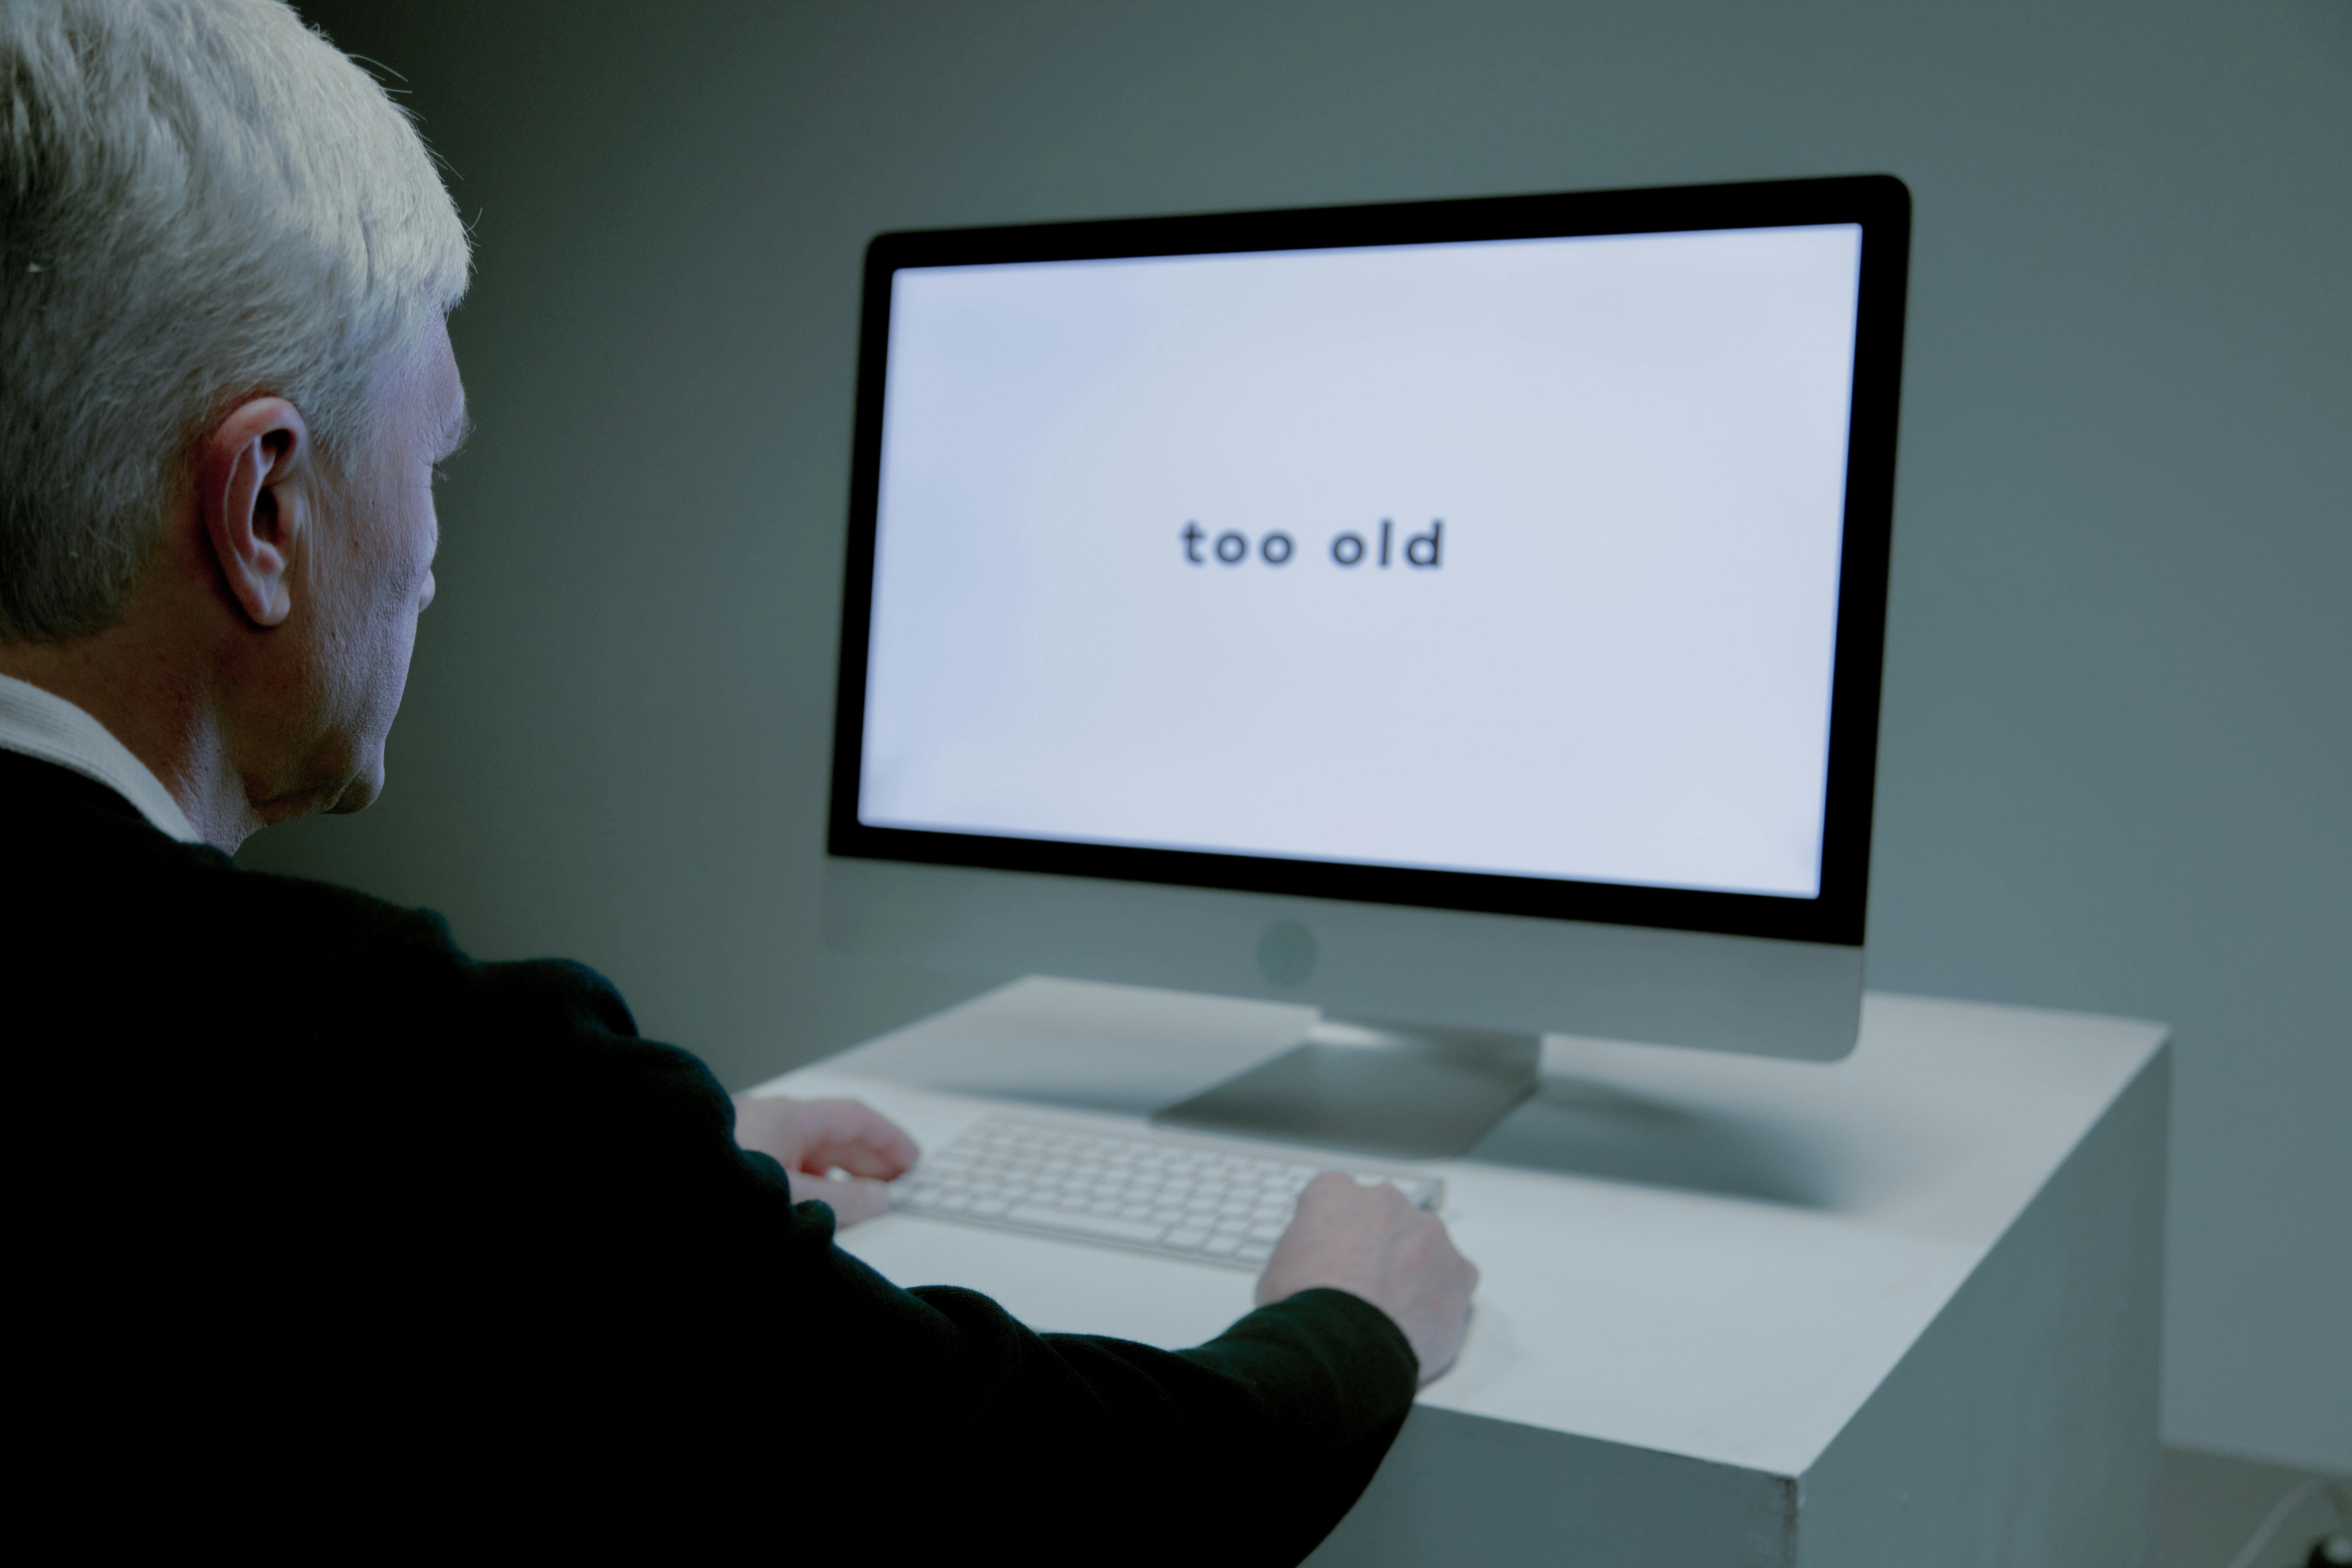 Old man reading "too old" text on his computer screen